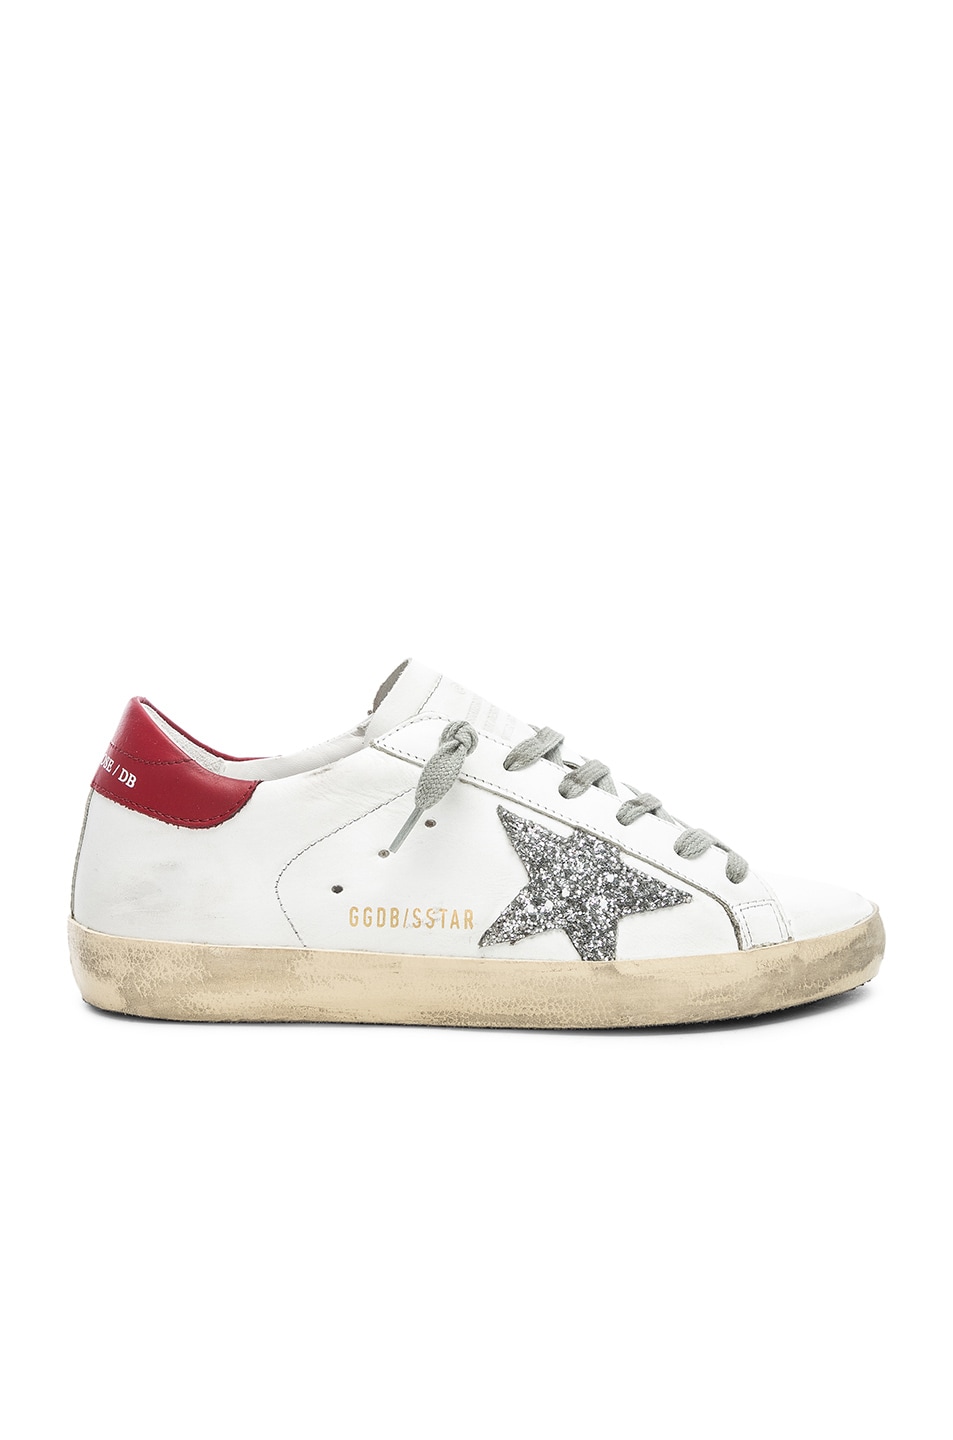 Image 1 of Golden Goose Leather Superstar Sneakers in White, Red & Silver Glitter